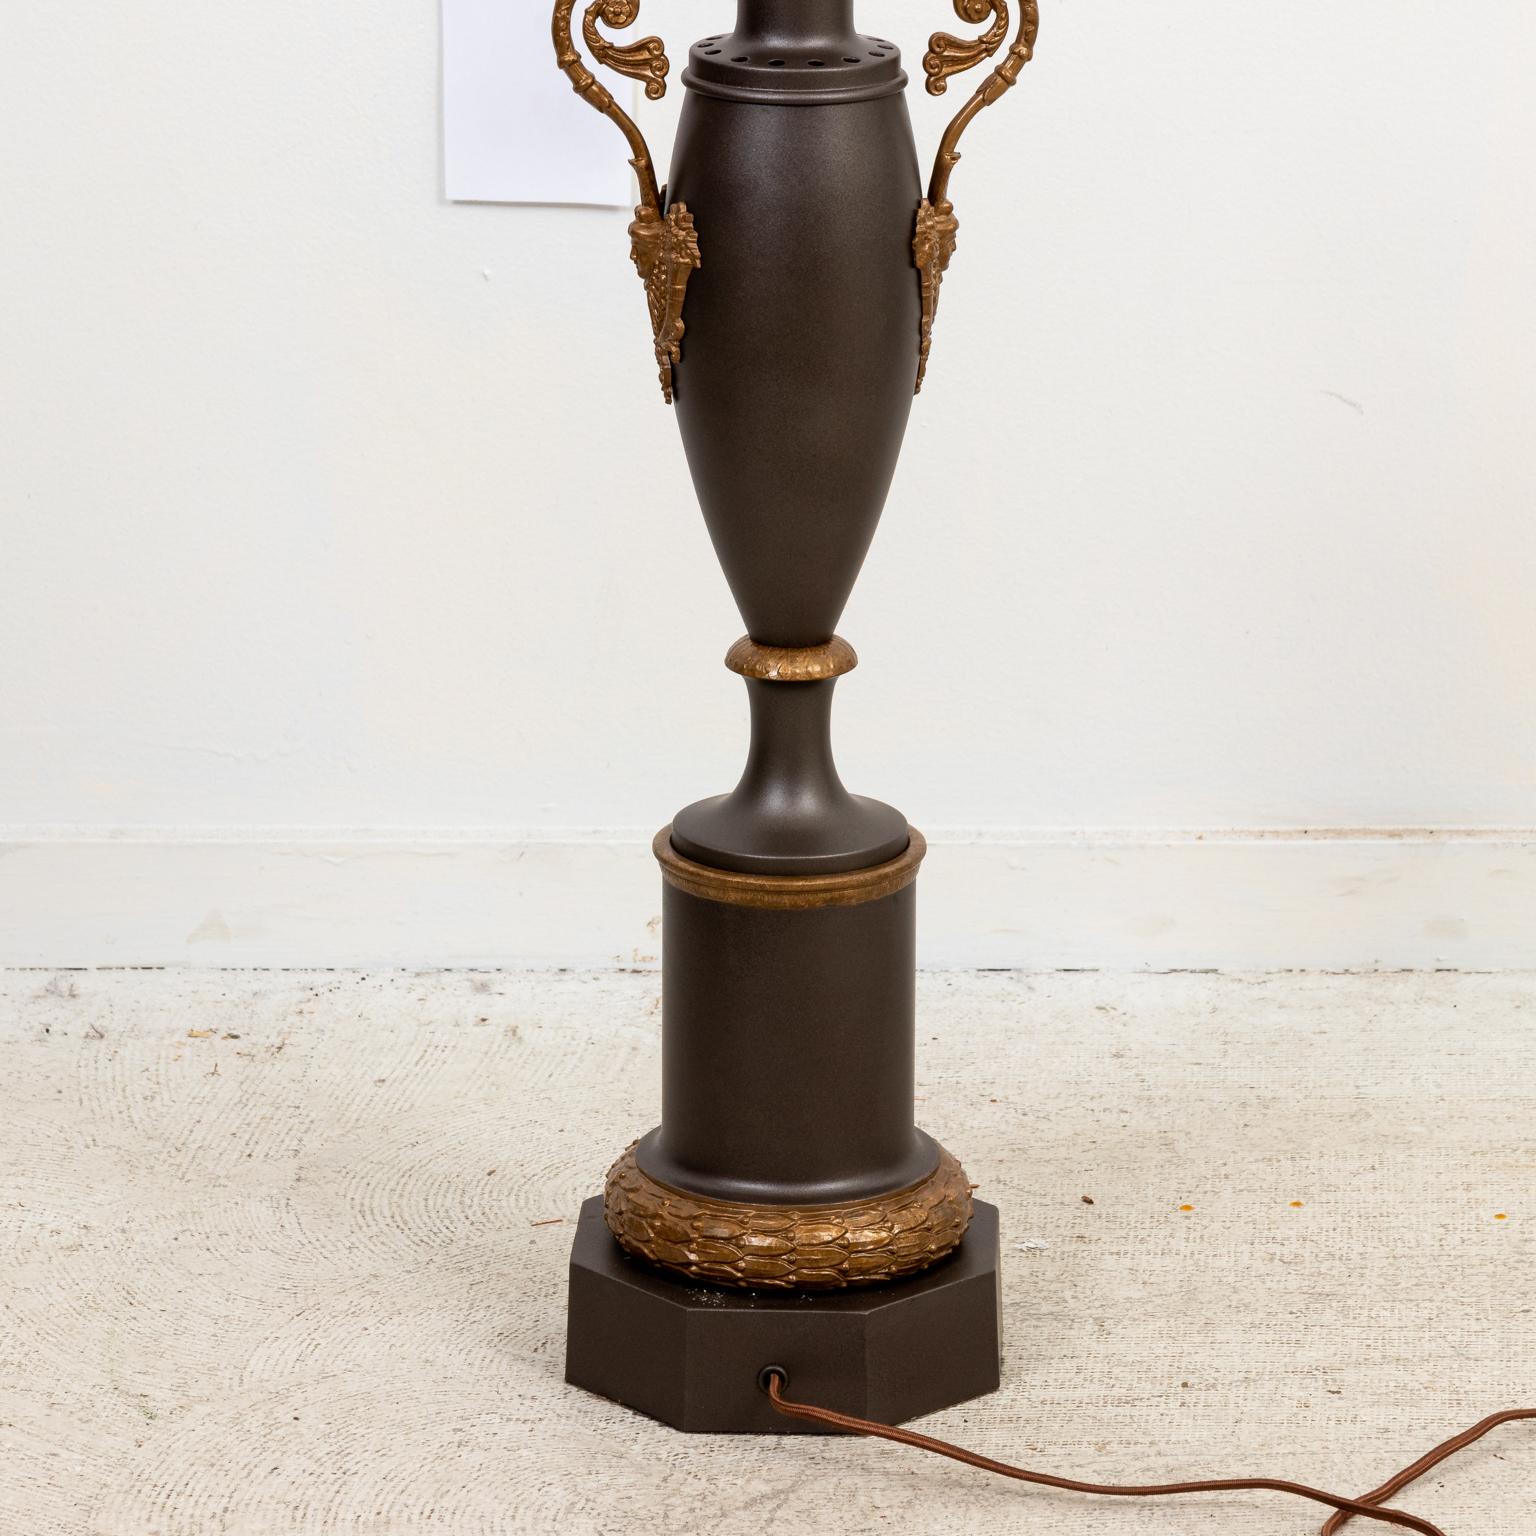 Circa 1990s Empire style metal urn shaped lamp in a gunmetal finish with scrolled arms and motifs of Cornucopia on the sides. Please note of wear consistent with age. Shades not included.